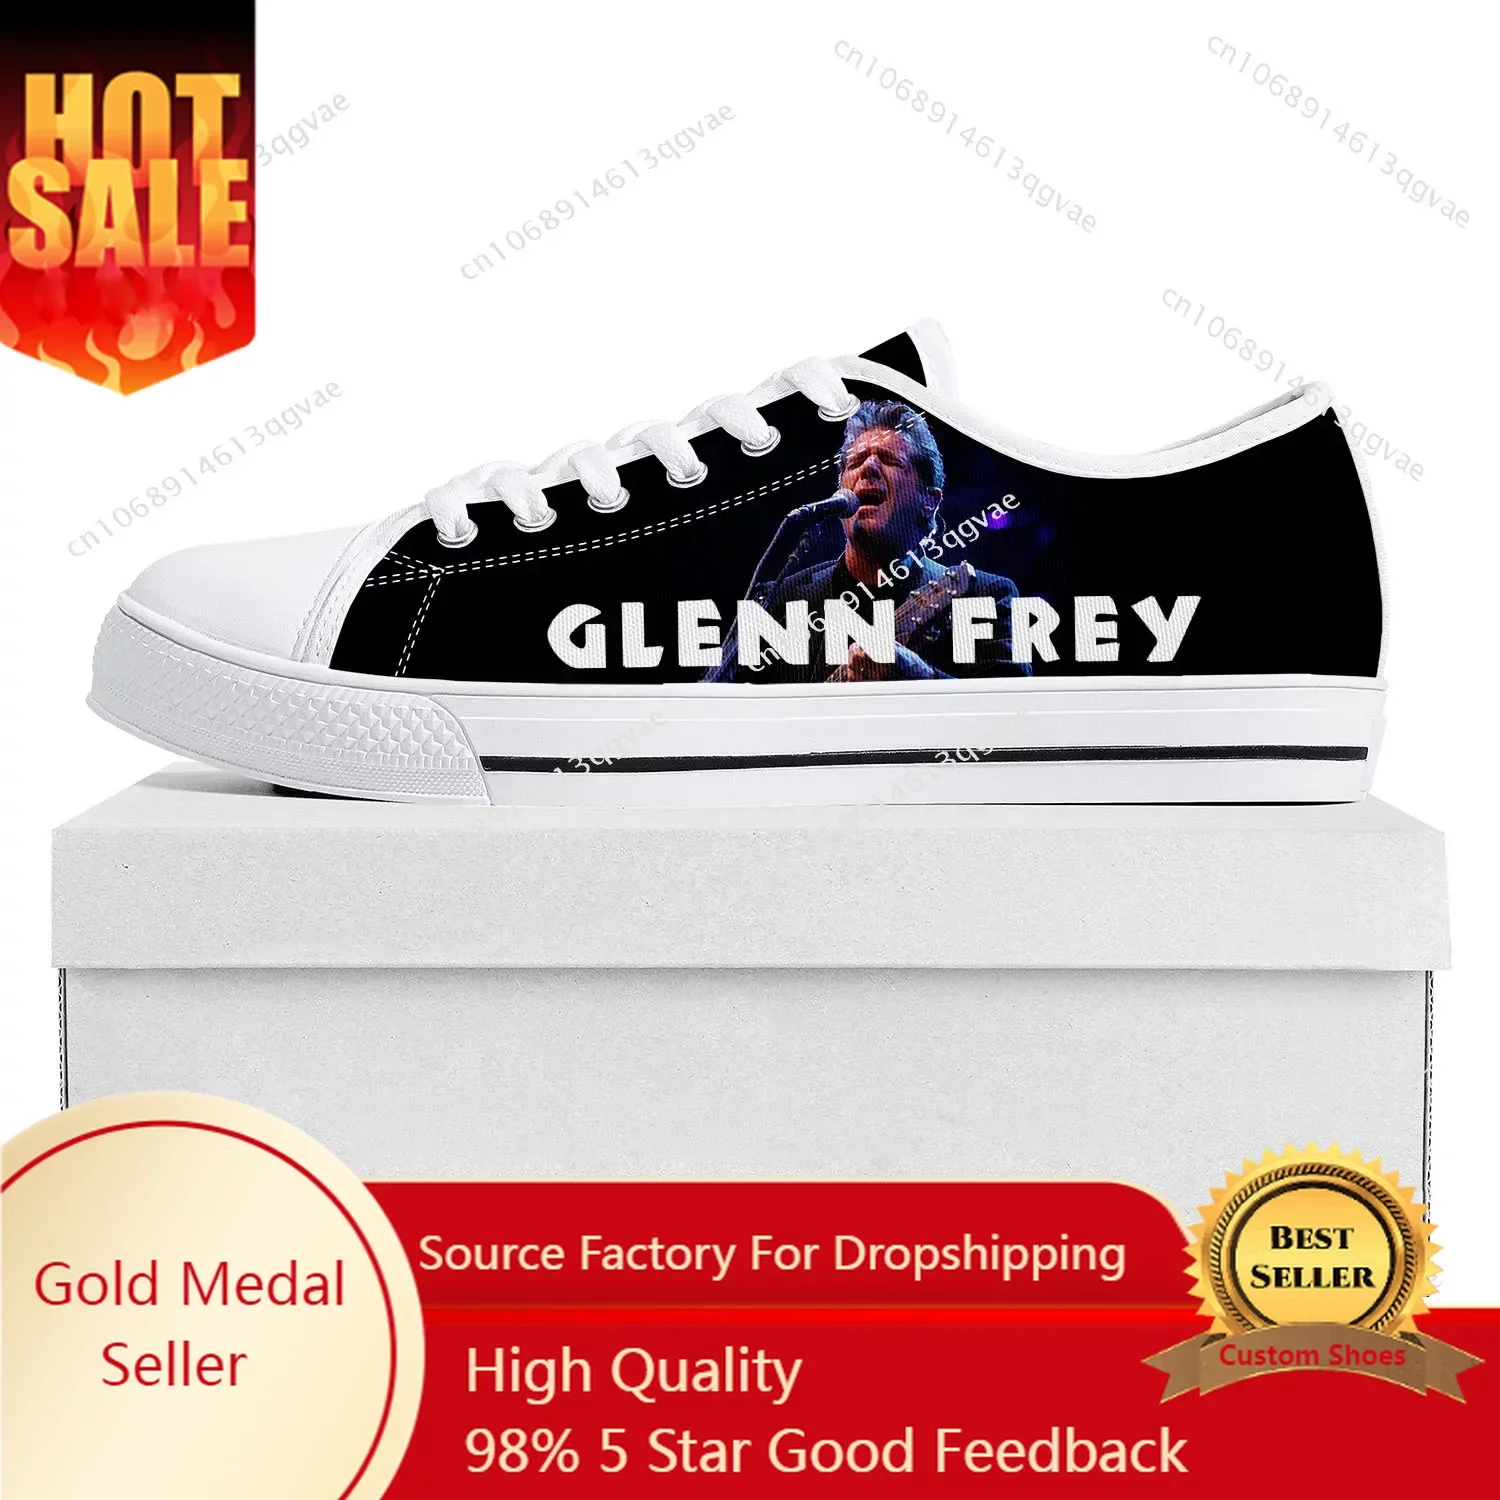 Glenn Frey Low Top Sneakers Mens Womens Teenager High Quality Sneaker Canvas Custom Made Shoes Casual Couple Customize Shoe asterix adventure obelix low top sneakers womens mens teenager high quality canvas sneaker casual anime cartoon customize shoes